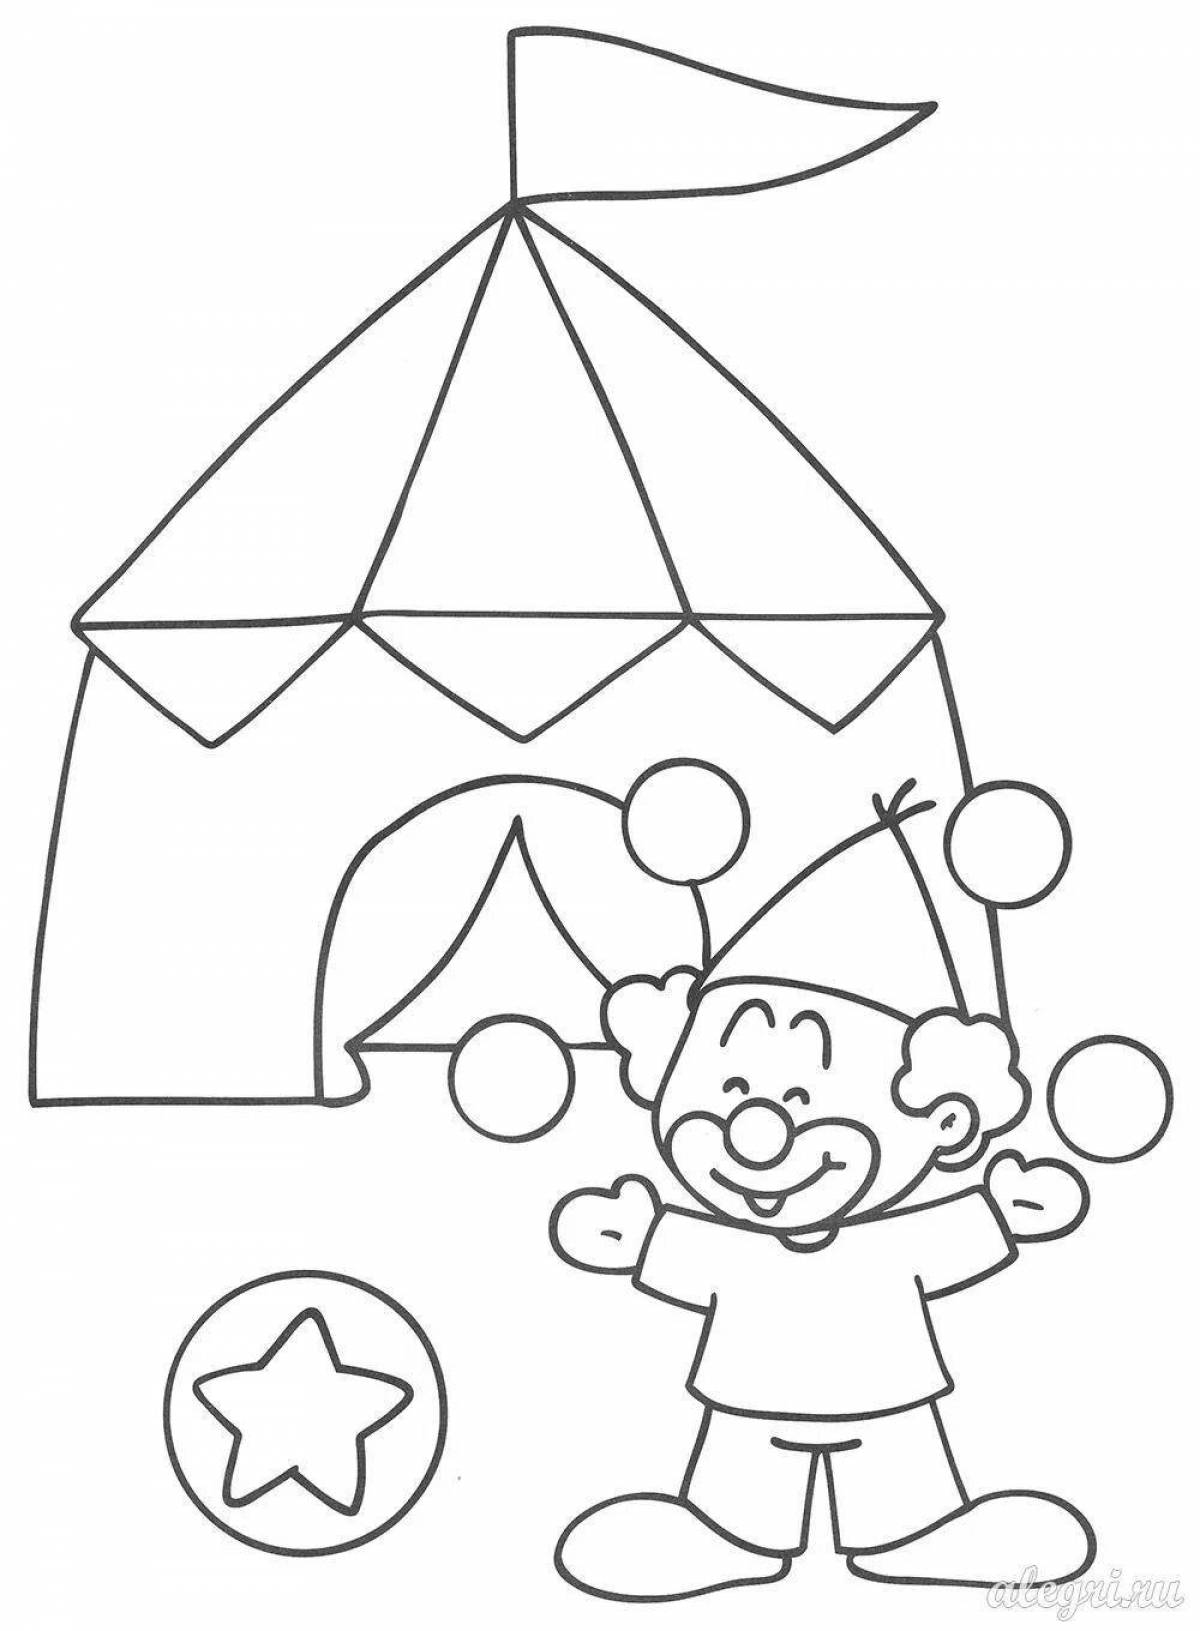 Cute circus coloring book for 5-6 year olds